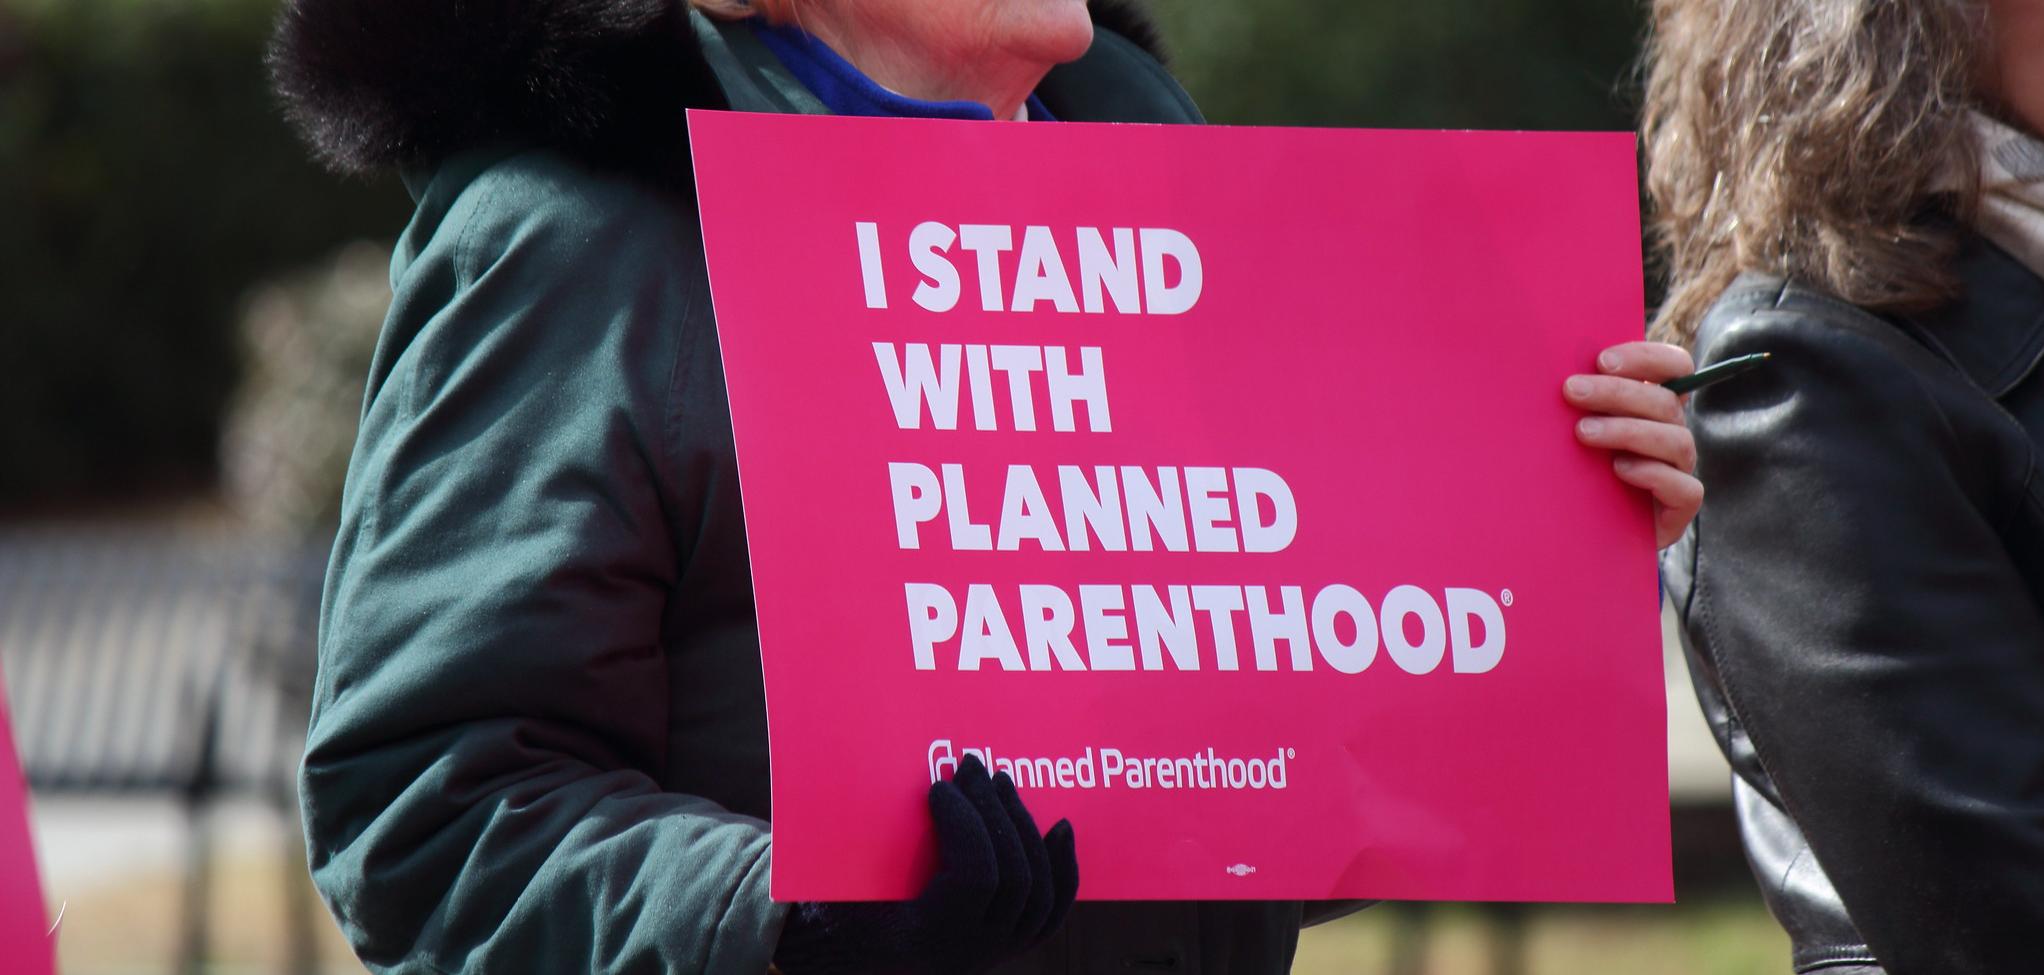 A sign that says "I stand with planned parenthood"